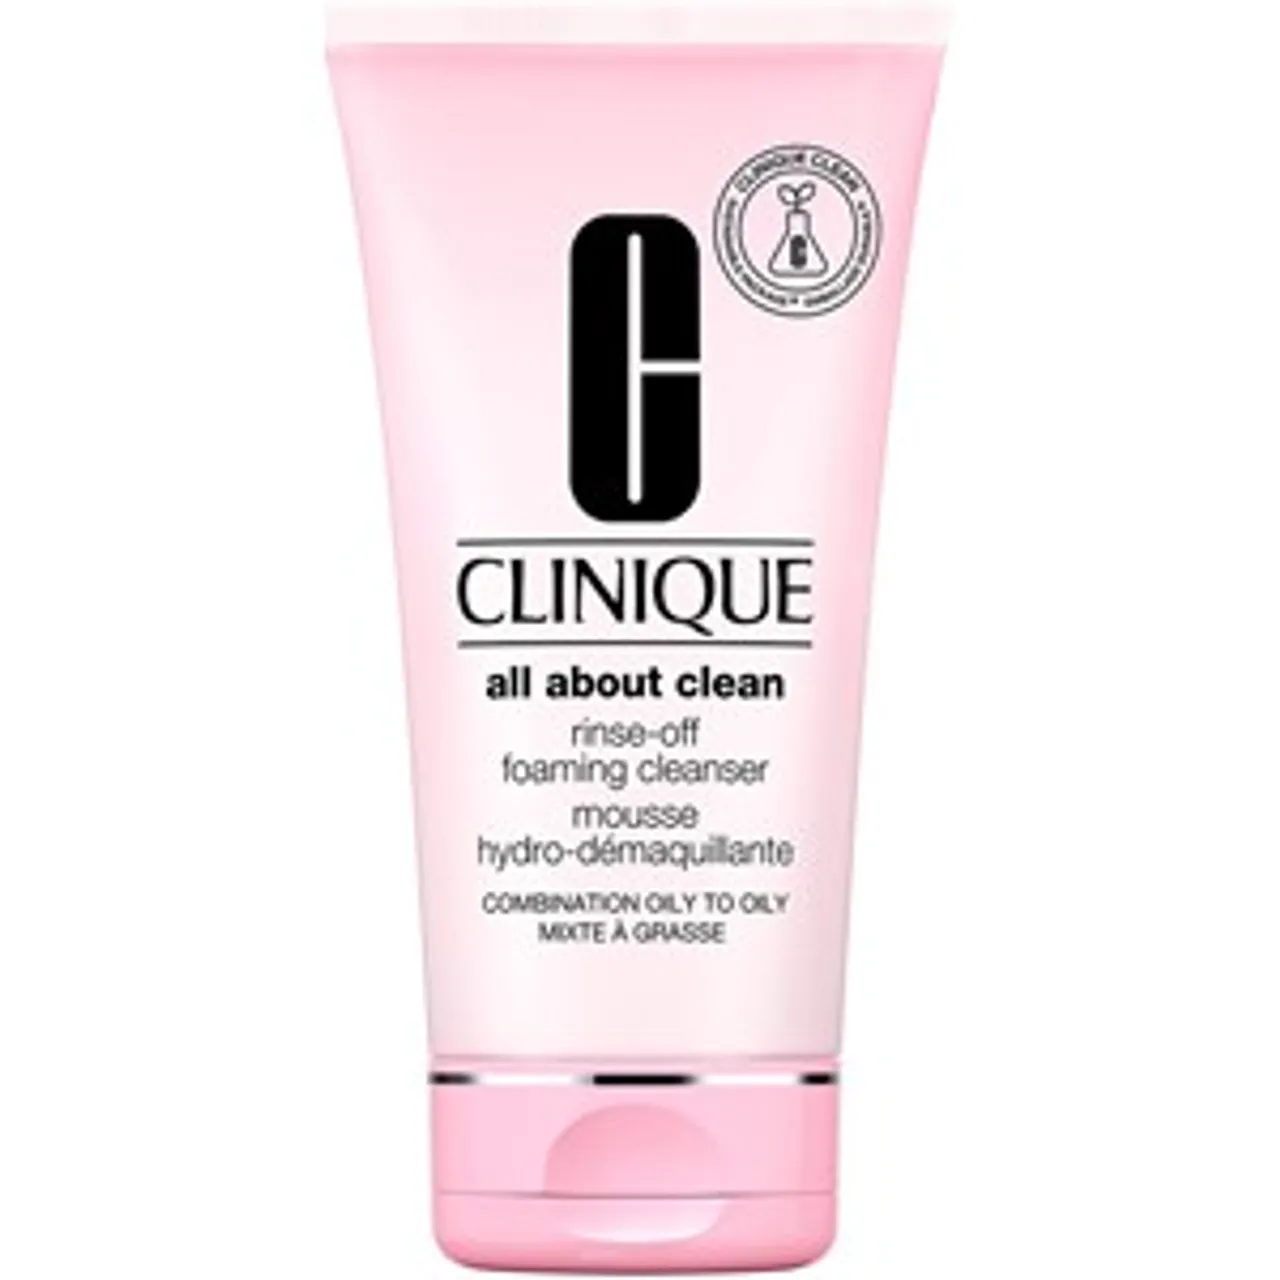 Clinique Rinse Off Foaming Cleanser 0 150 ml